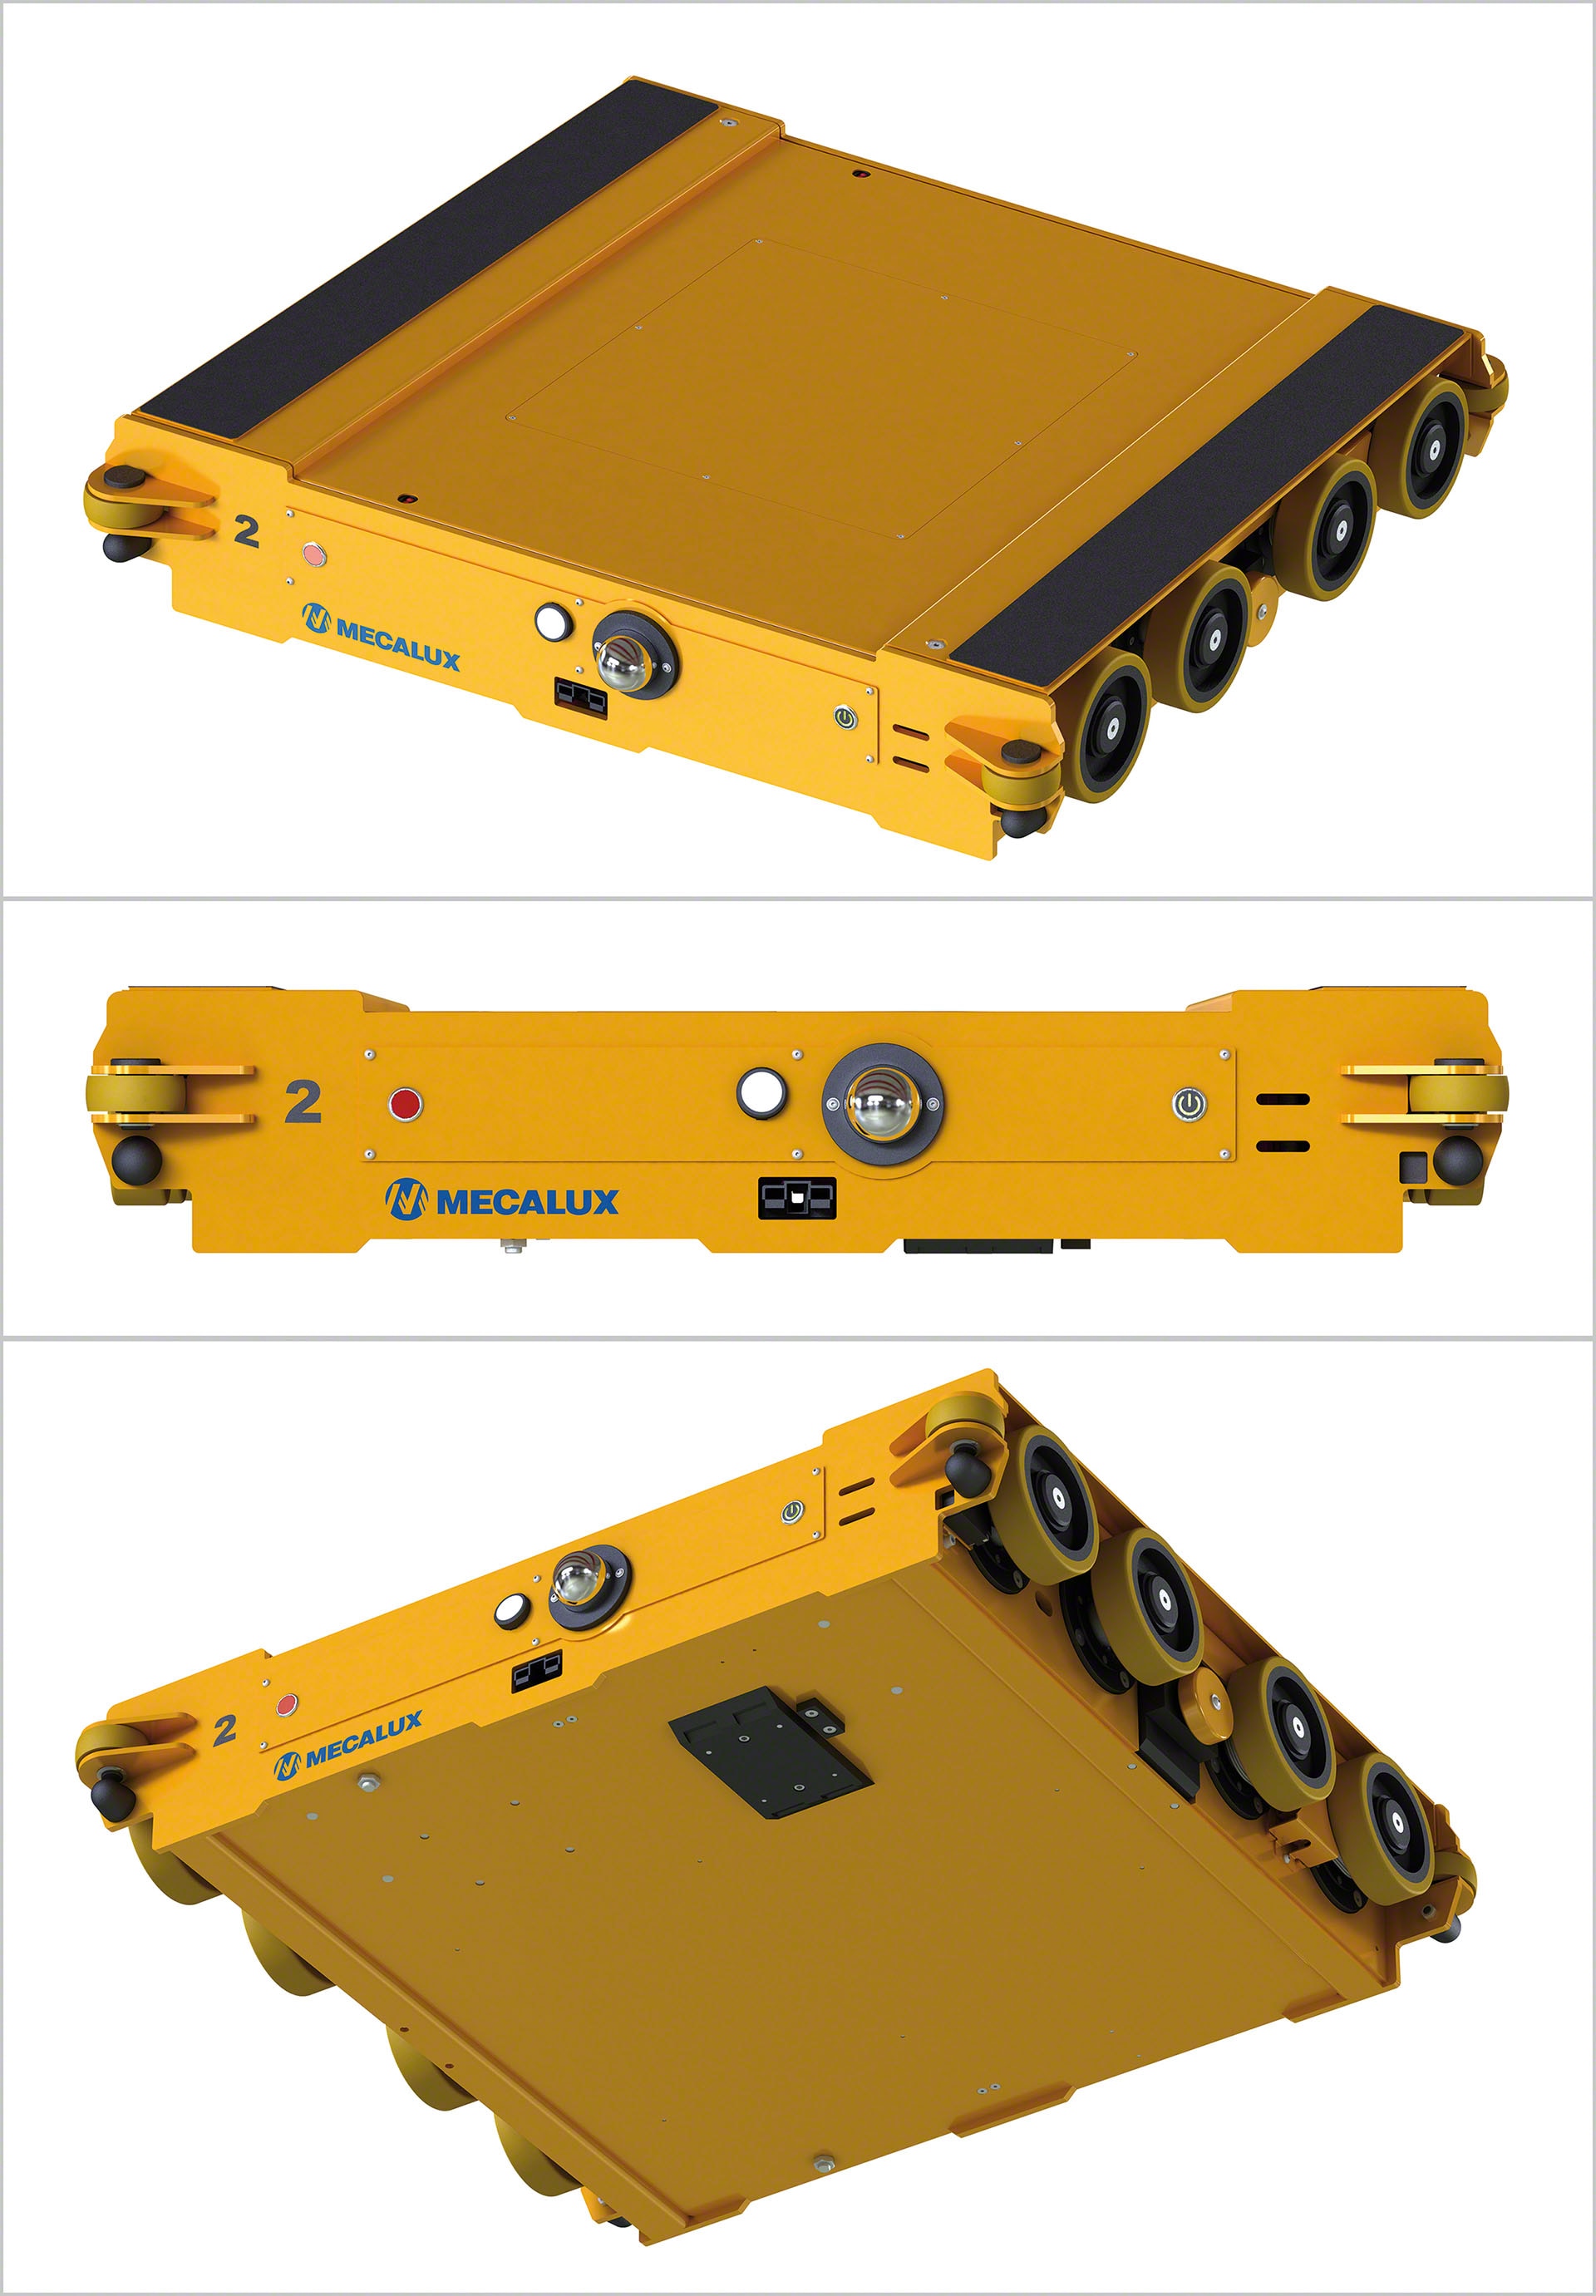 The automatic shuttle has multiple safety components such as a scanner or pallet detector